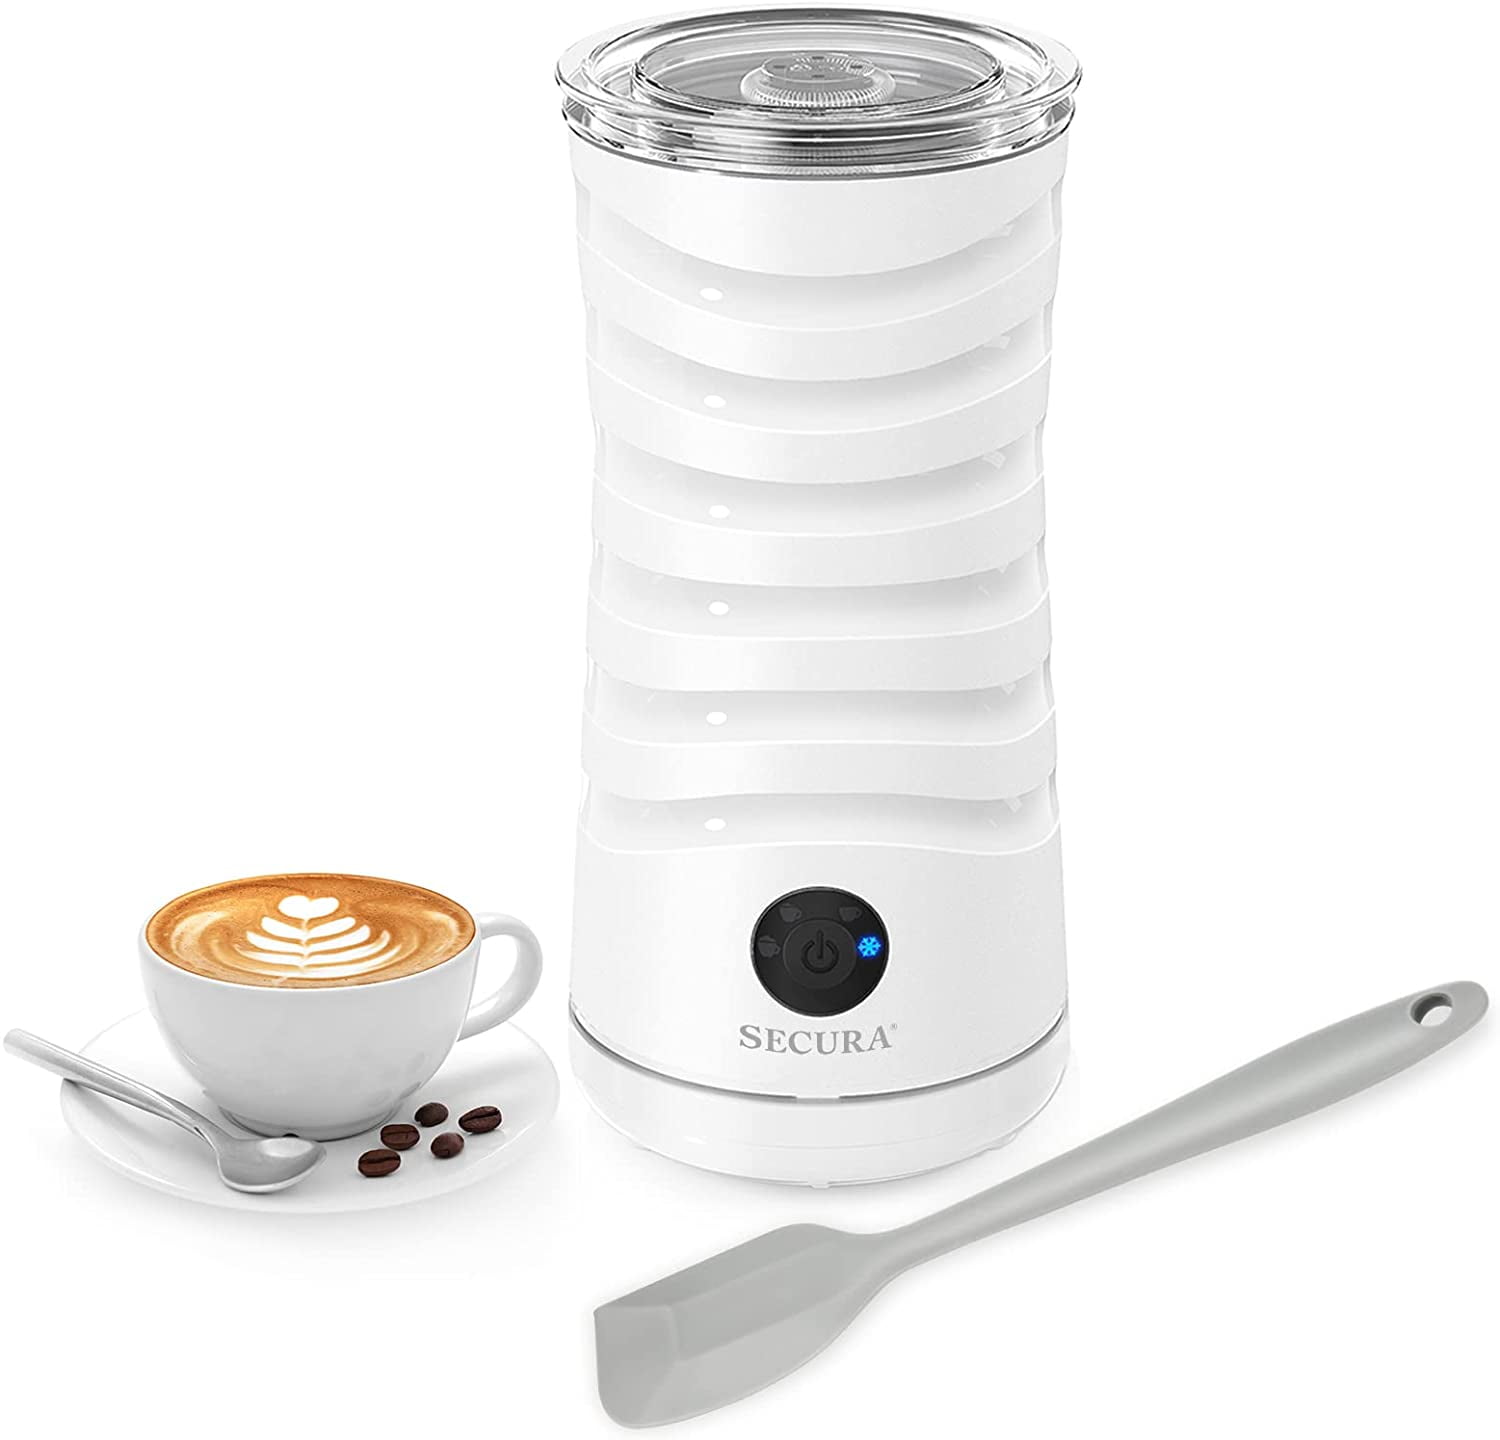 Secura Automatic Milk Frother, 4-in-1 Electric Milk Steamer, 17oz  Detachable Hot/Cold Foam Maker, Milk Warmer for Latte, Cappuccinos,  Macchiato, Hot Chocolate, with 3 Whisks & Silicone Spatula - The Secura